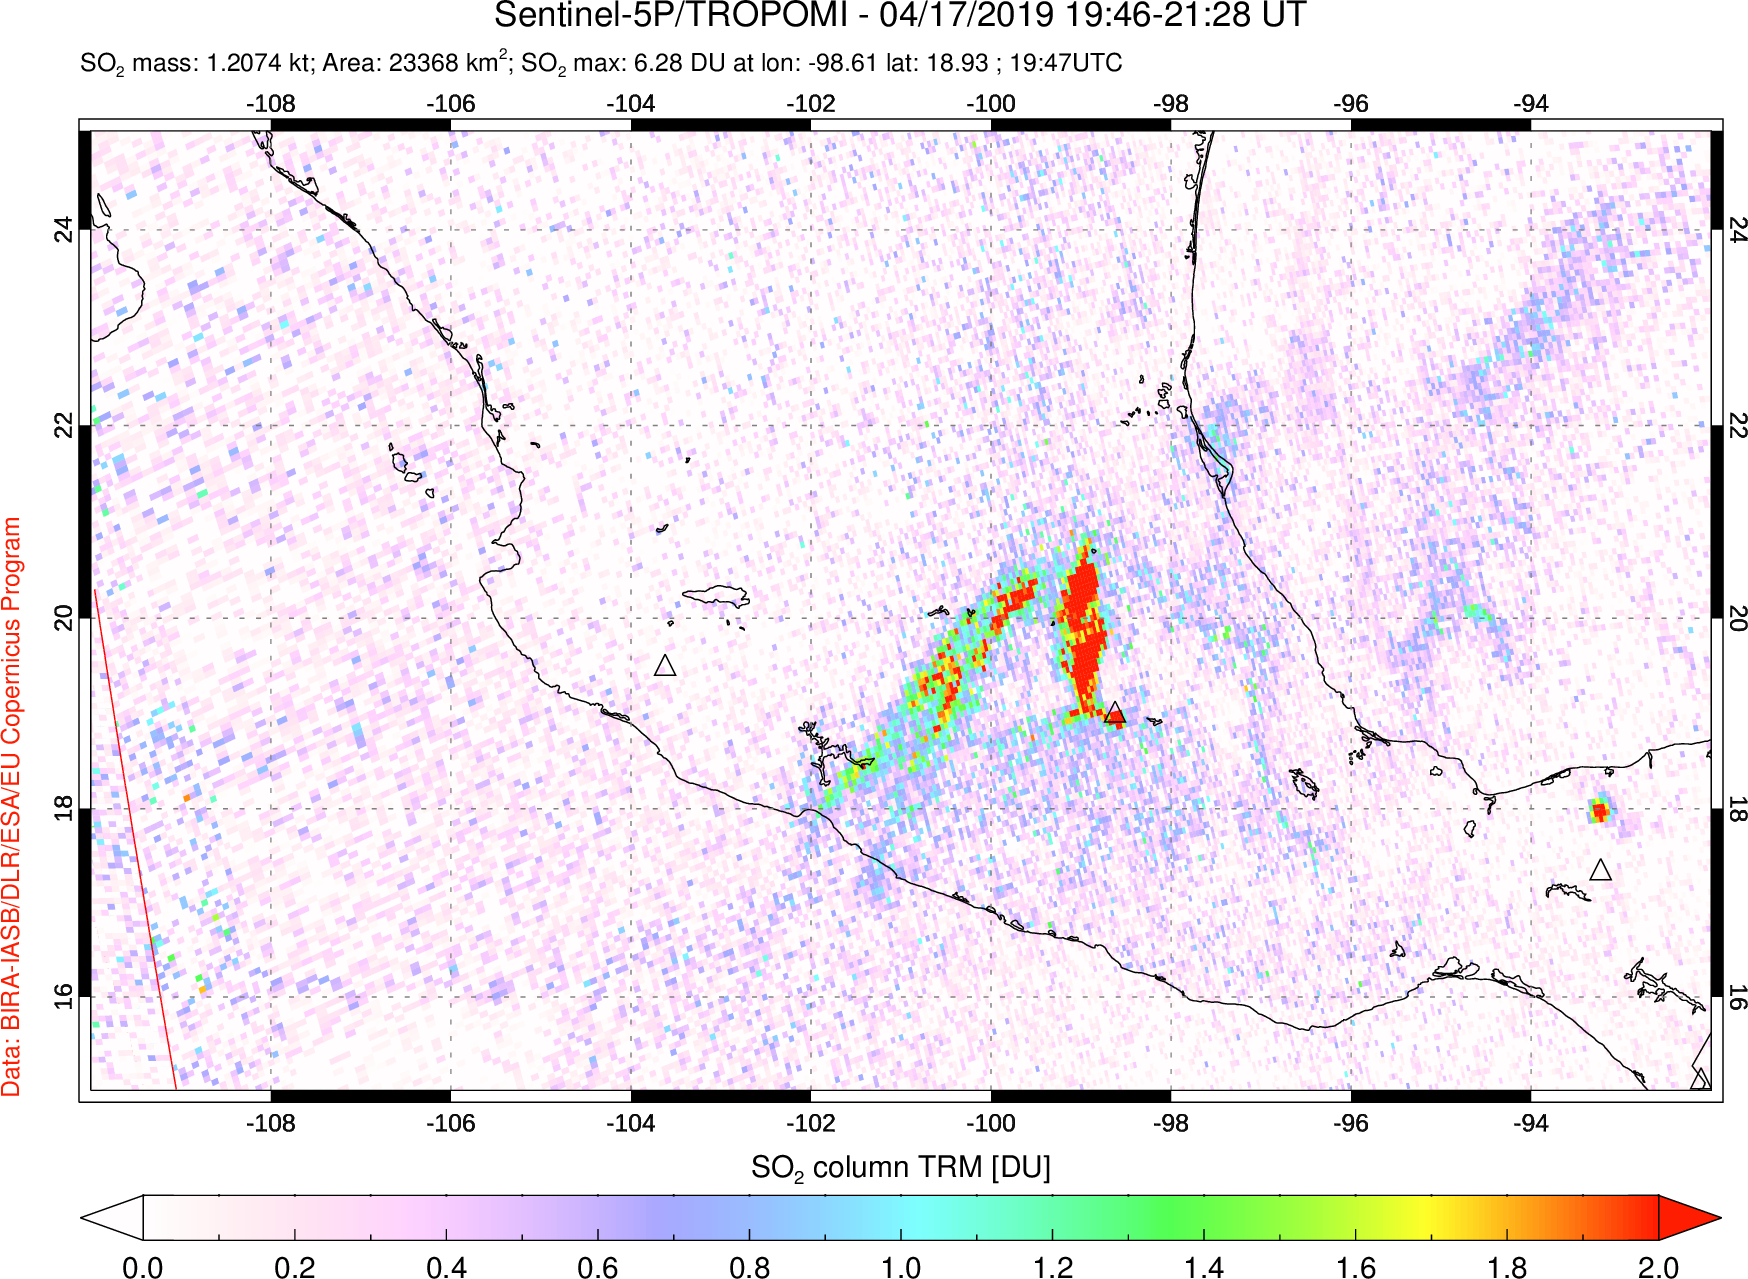 A sulfur dioxide image over Mexico on Apr 17, 2019.